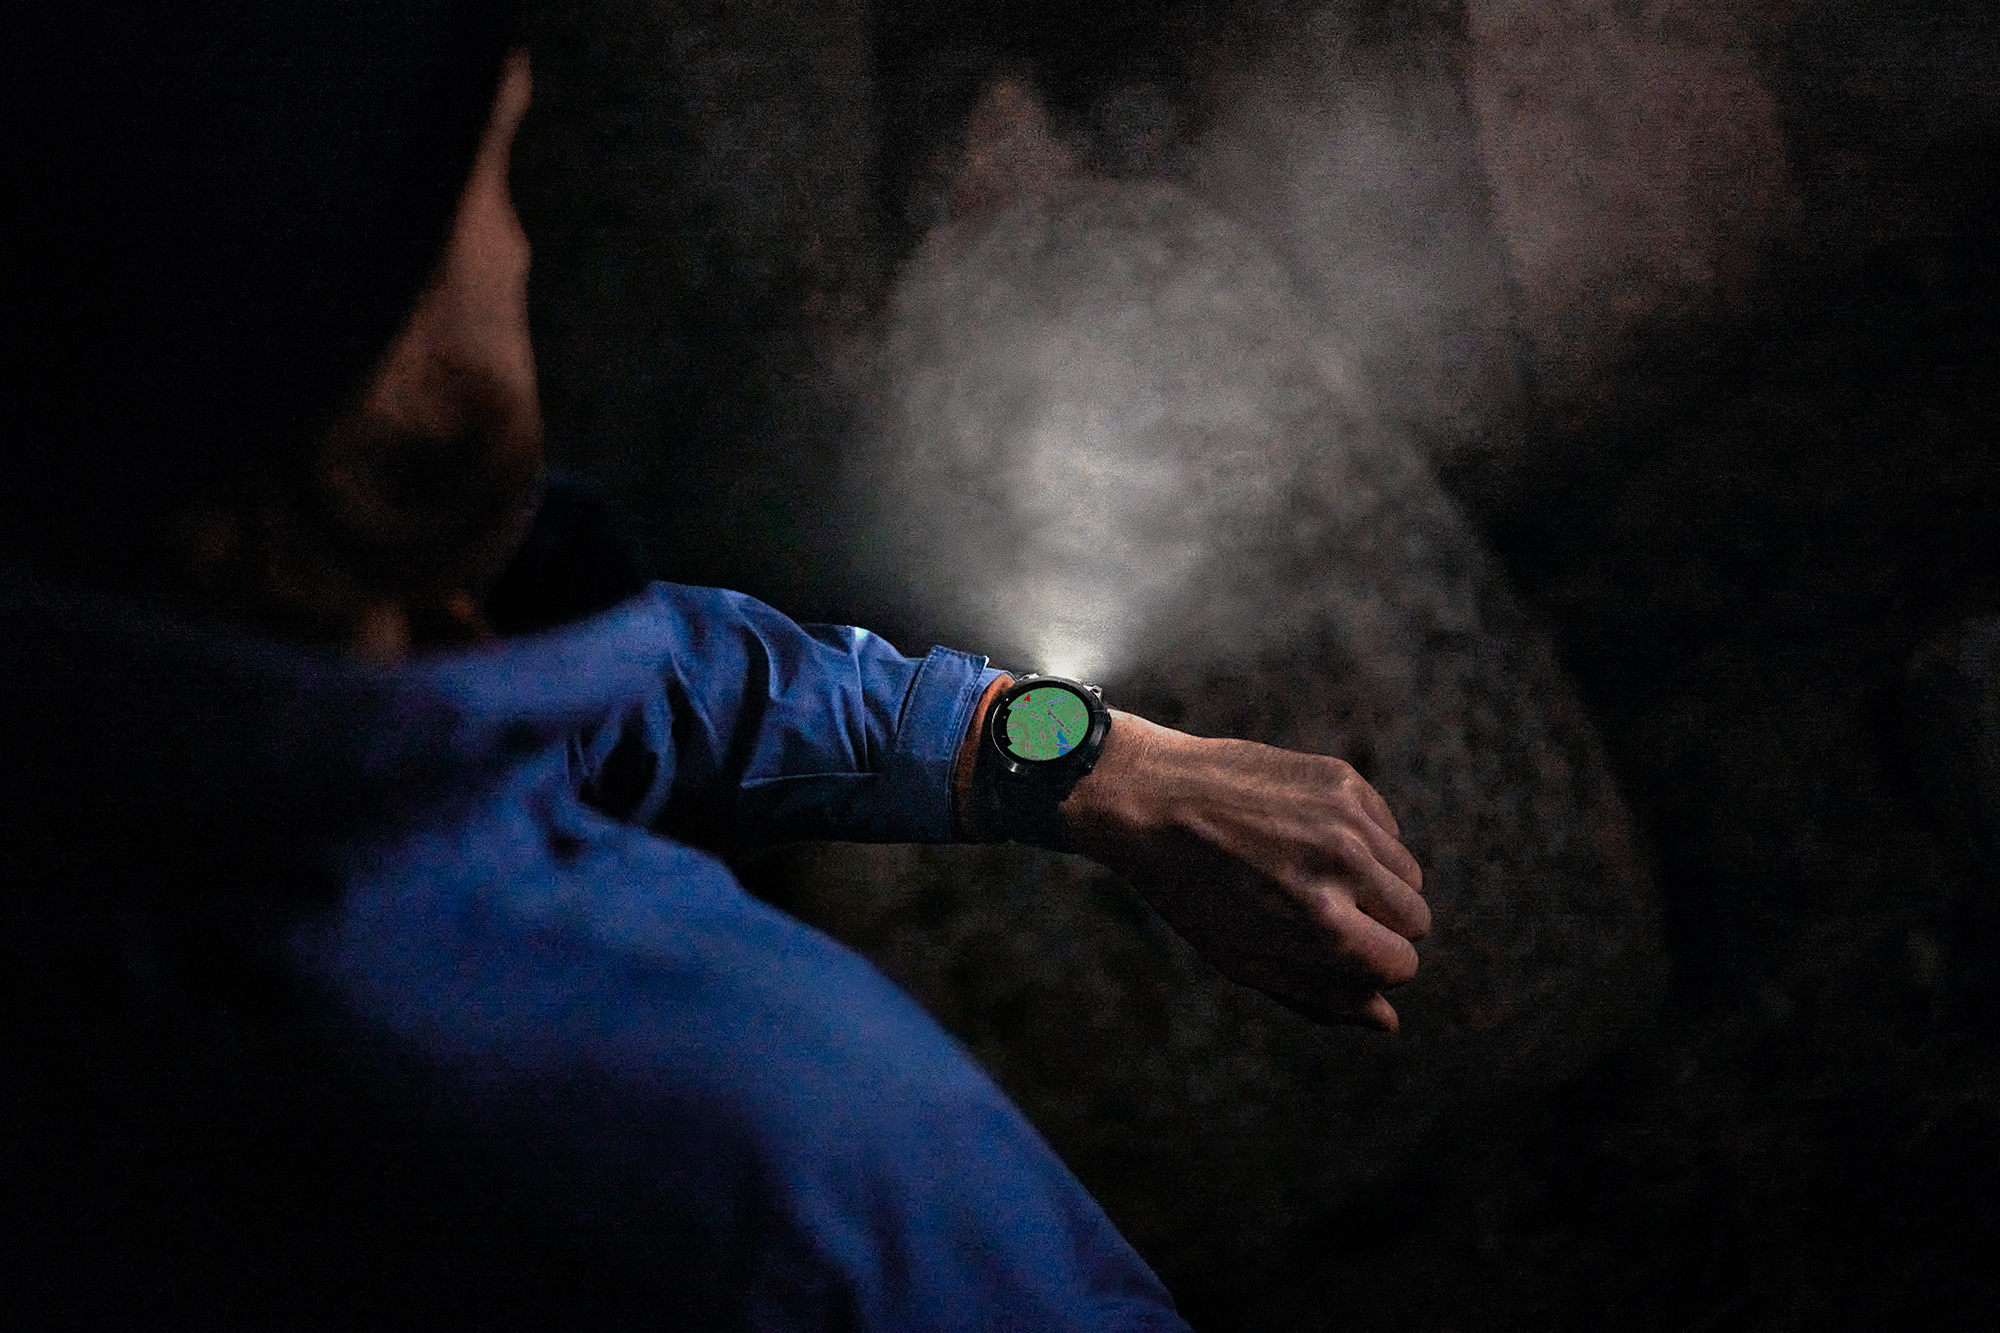 Garmin’s newest smartwatches are even more adventure-ready